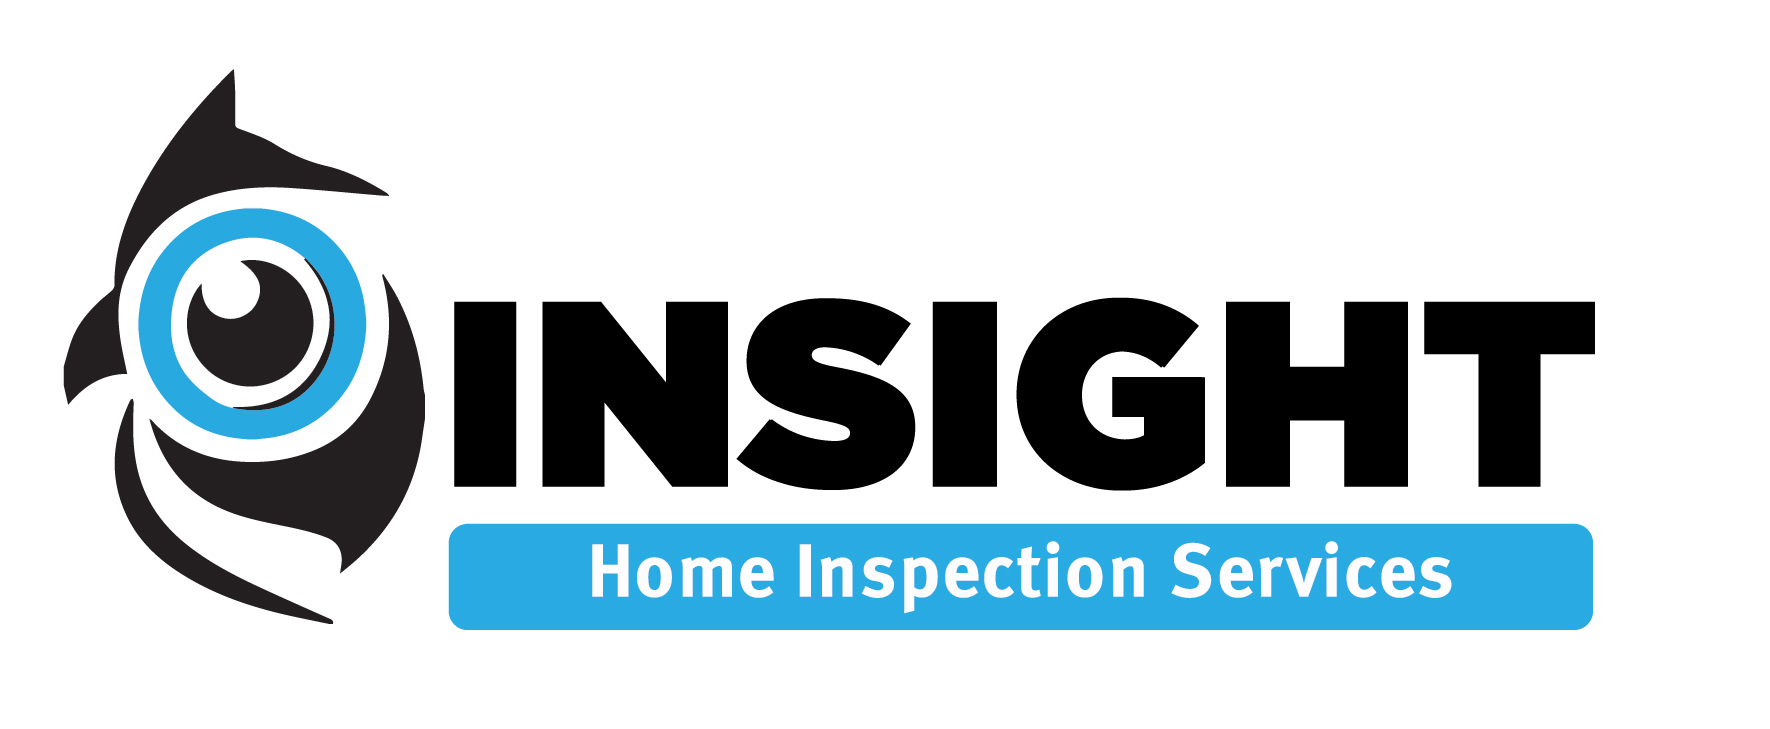 Insight Home Inspection Services, LLC Logo